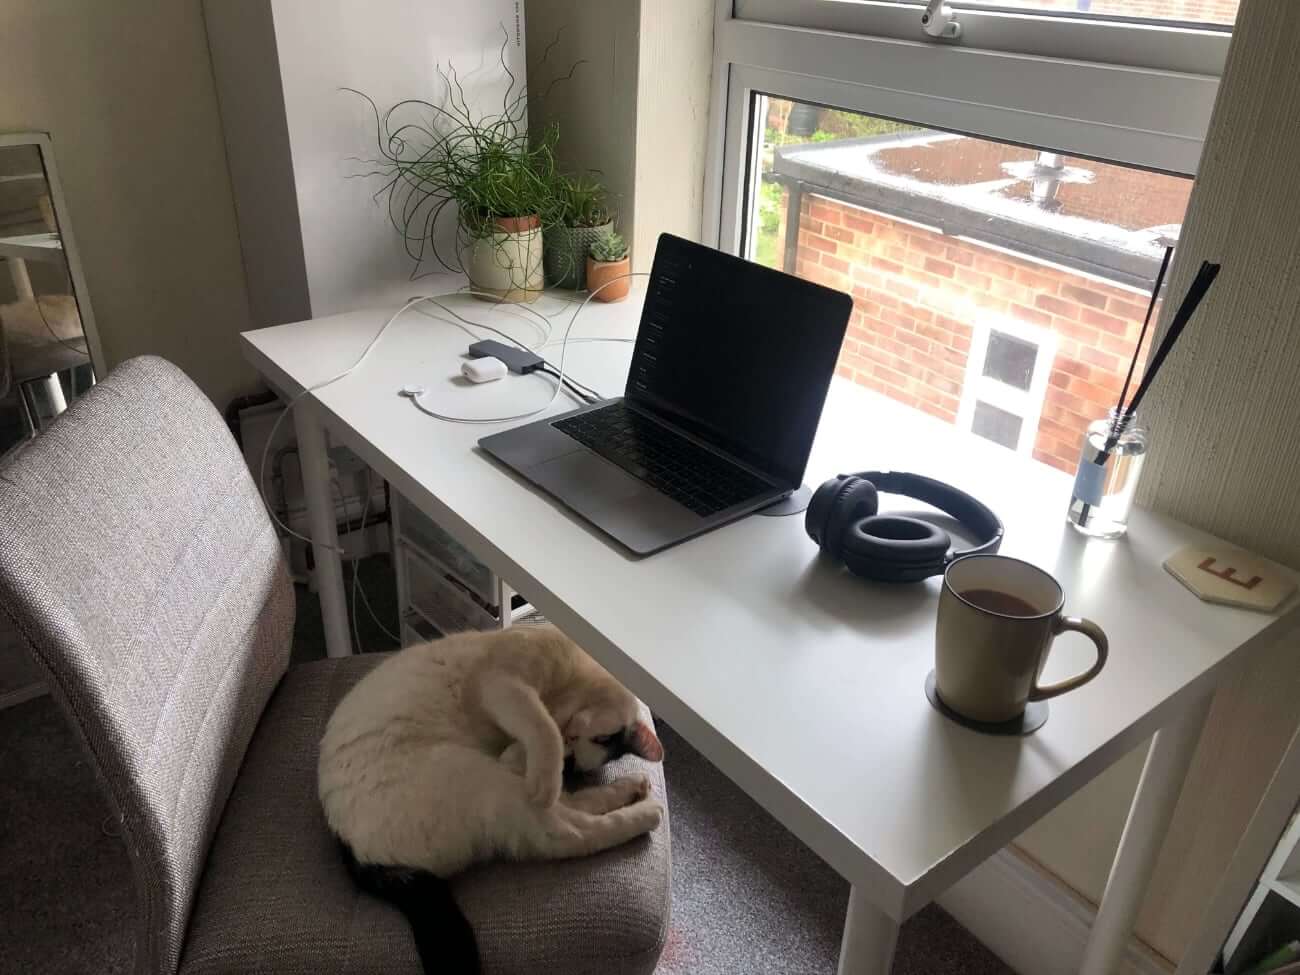 Image of Emily's work from home setup, complete with cat